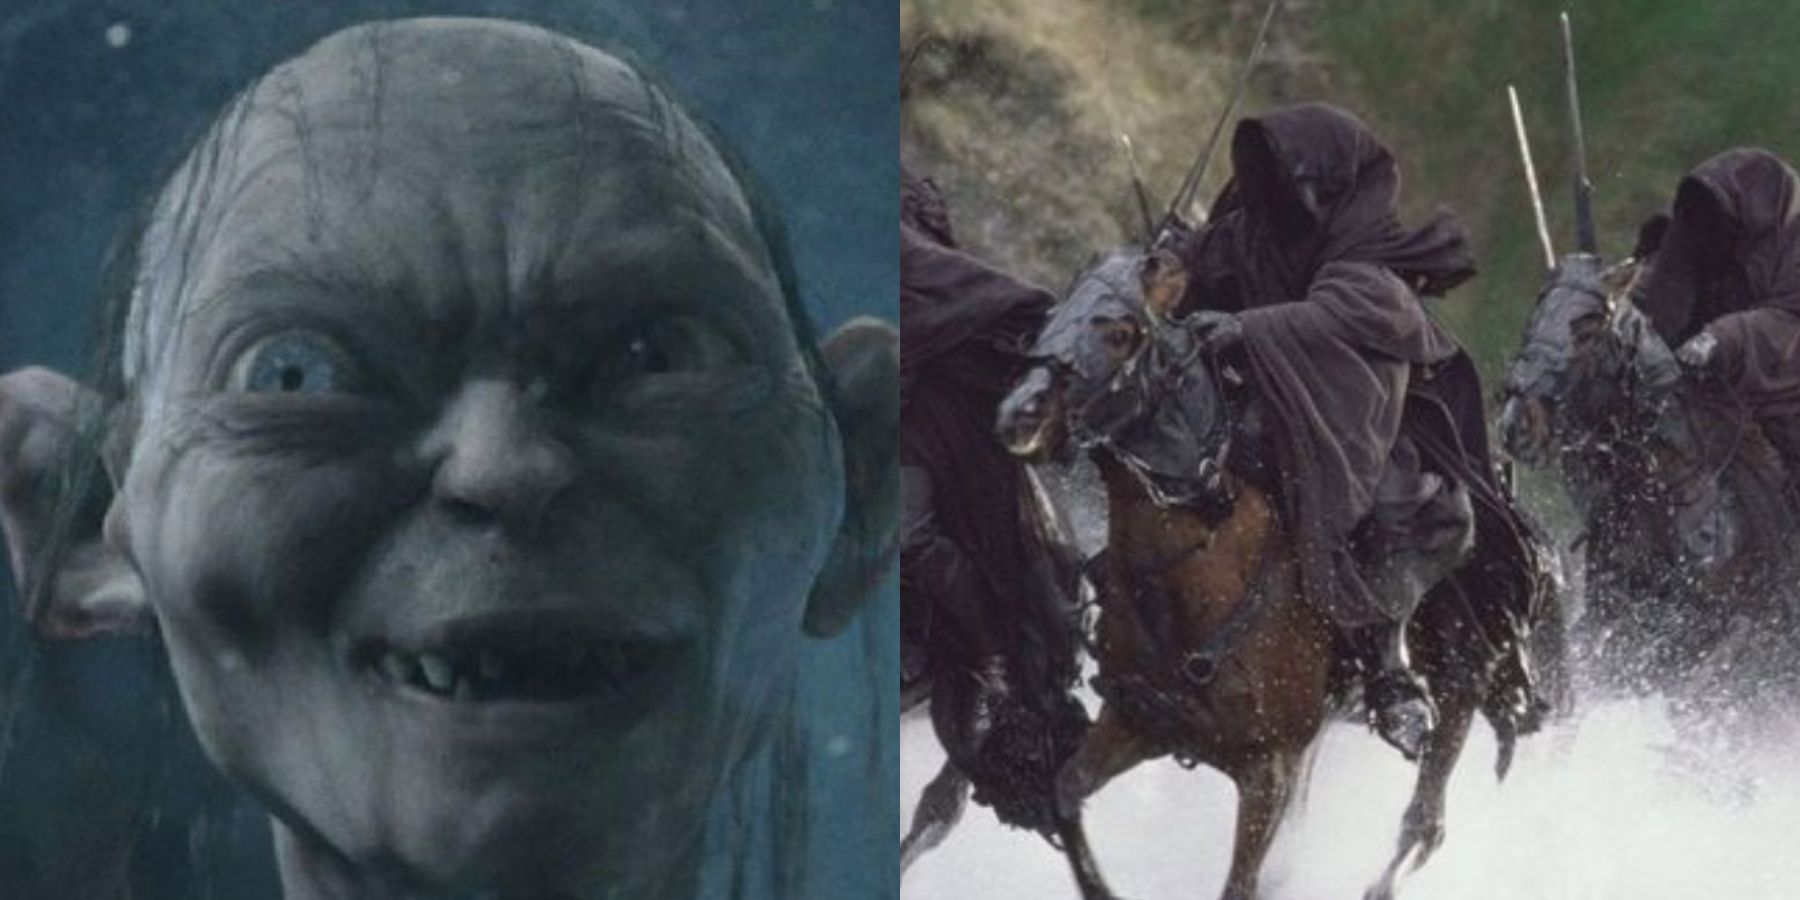 Gollum and the Nazgûl in Lord of the Rings